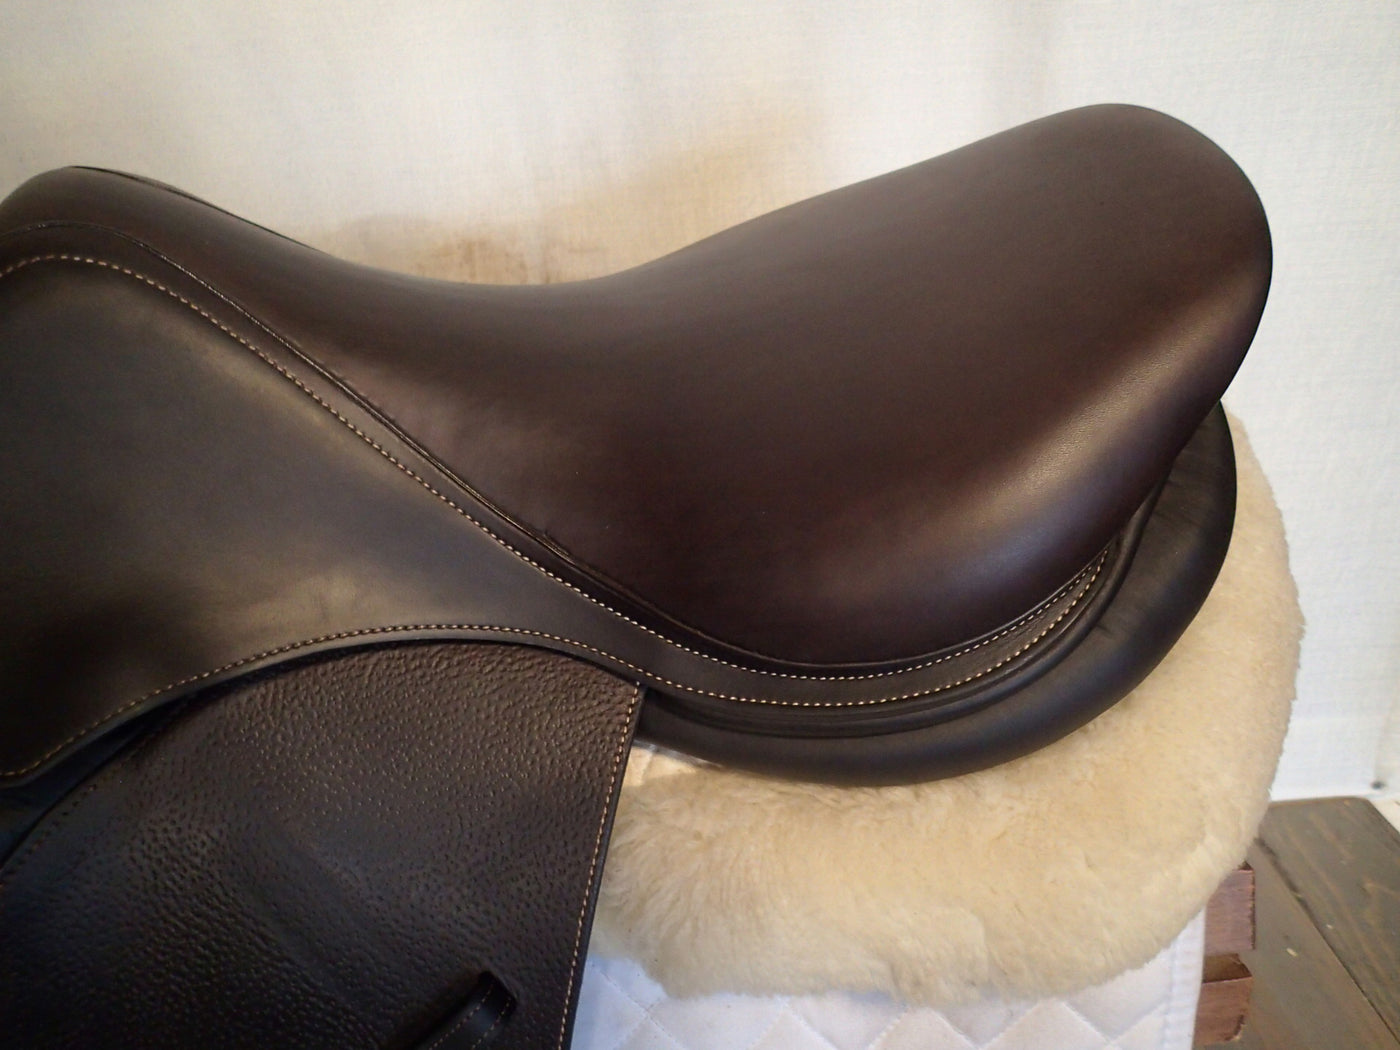 17.5" Voltaire Palm Beach Saddle - 2020 - 2A Flaps - 4.75" dot to dot - Pro Panels